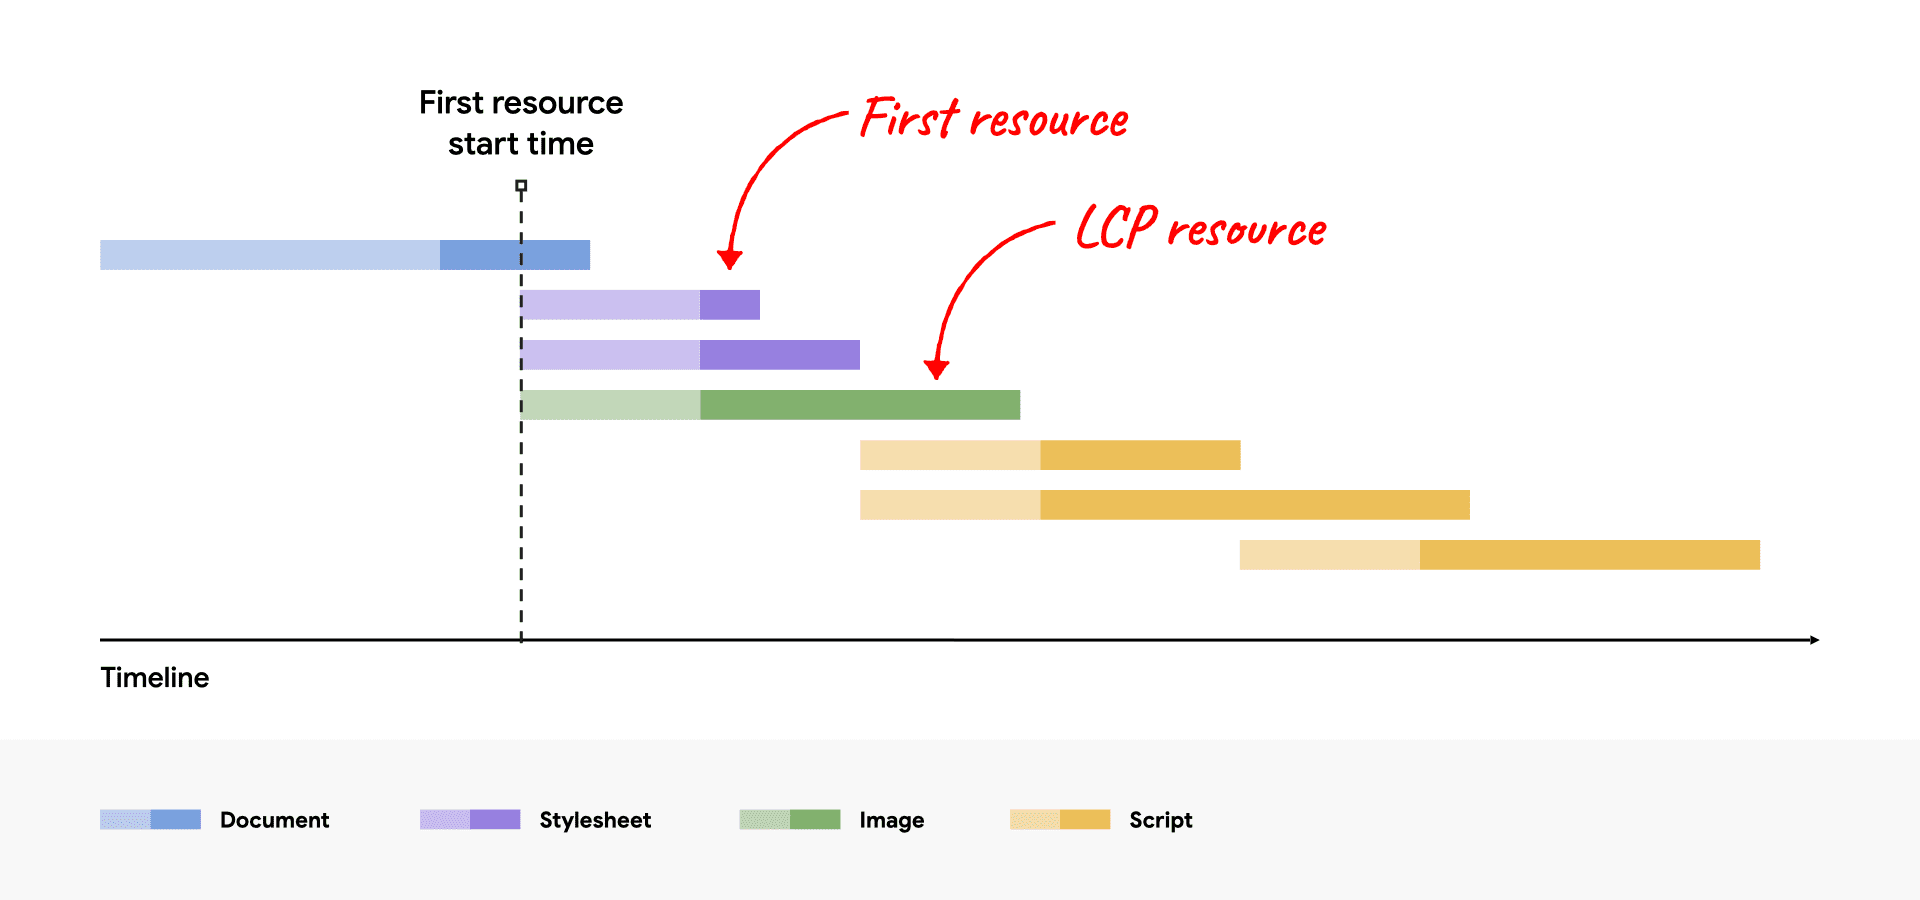 A network waterfall diagram showing the LCP resource now starting at the same time as the first resource